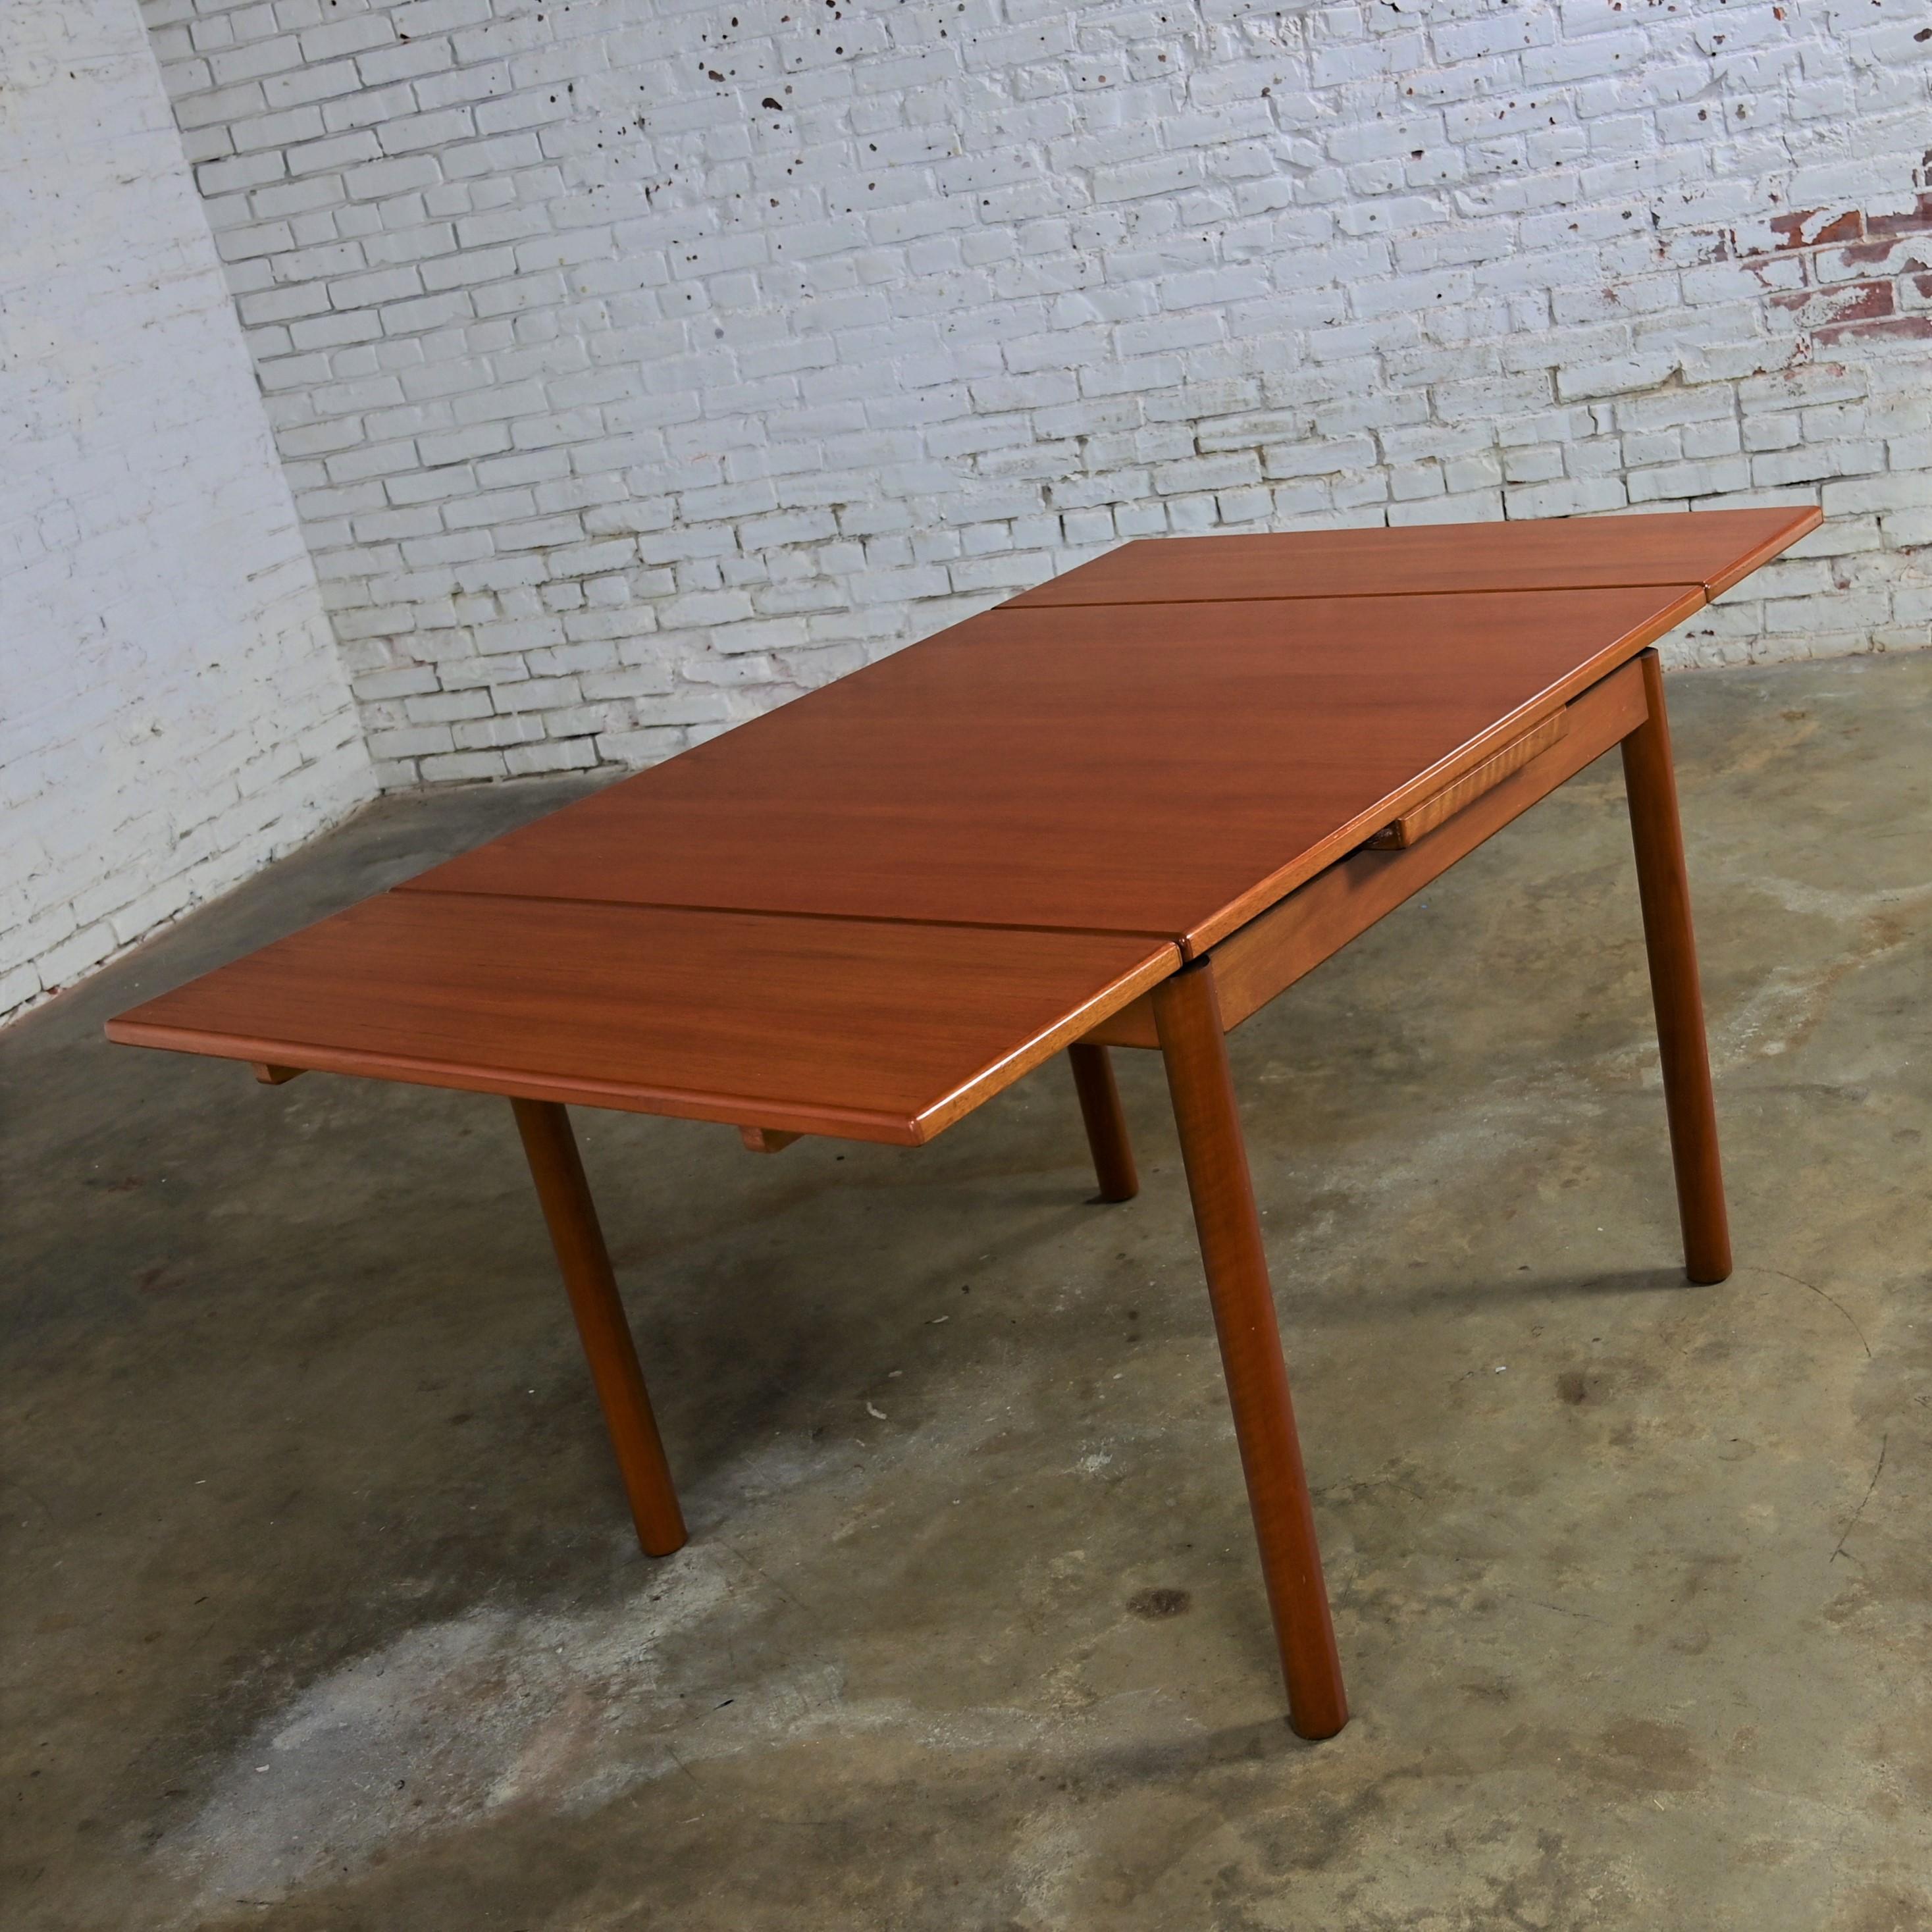 Scandinavian Modern Style Teak Square Extension Dining Table Made in Singapore For Sale 4